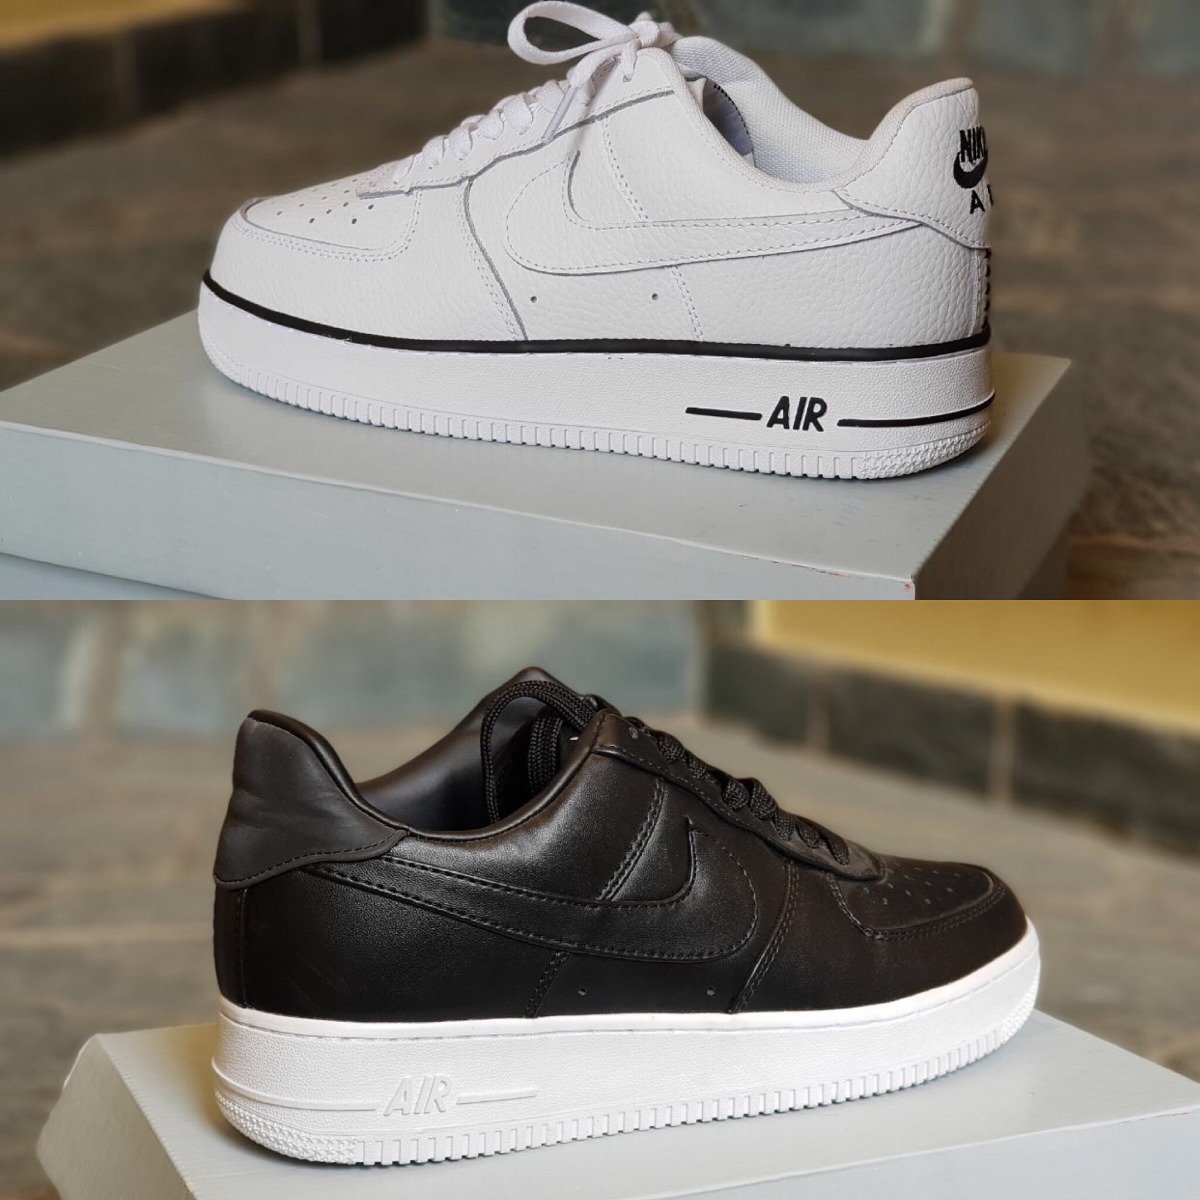 nike force one 2018 cheap online